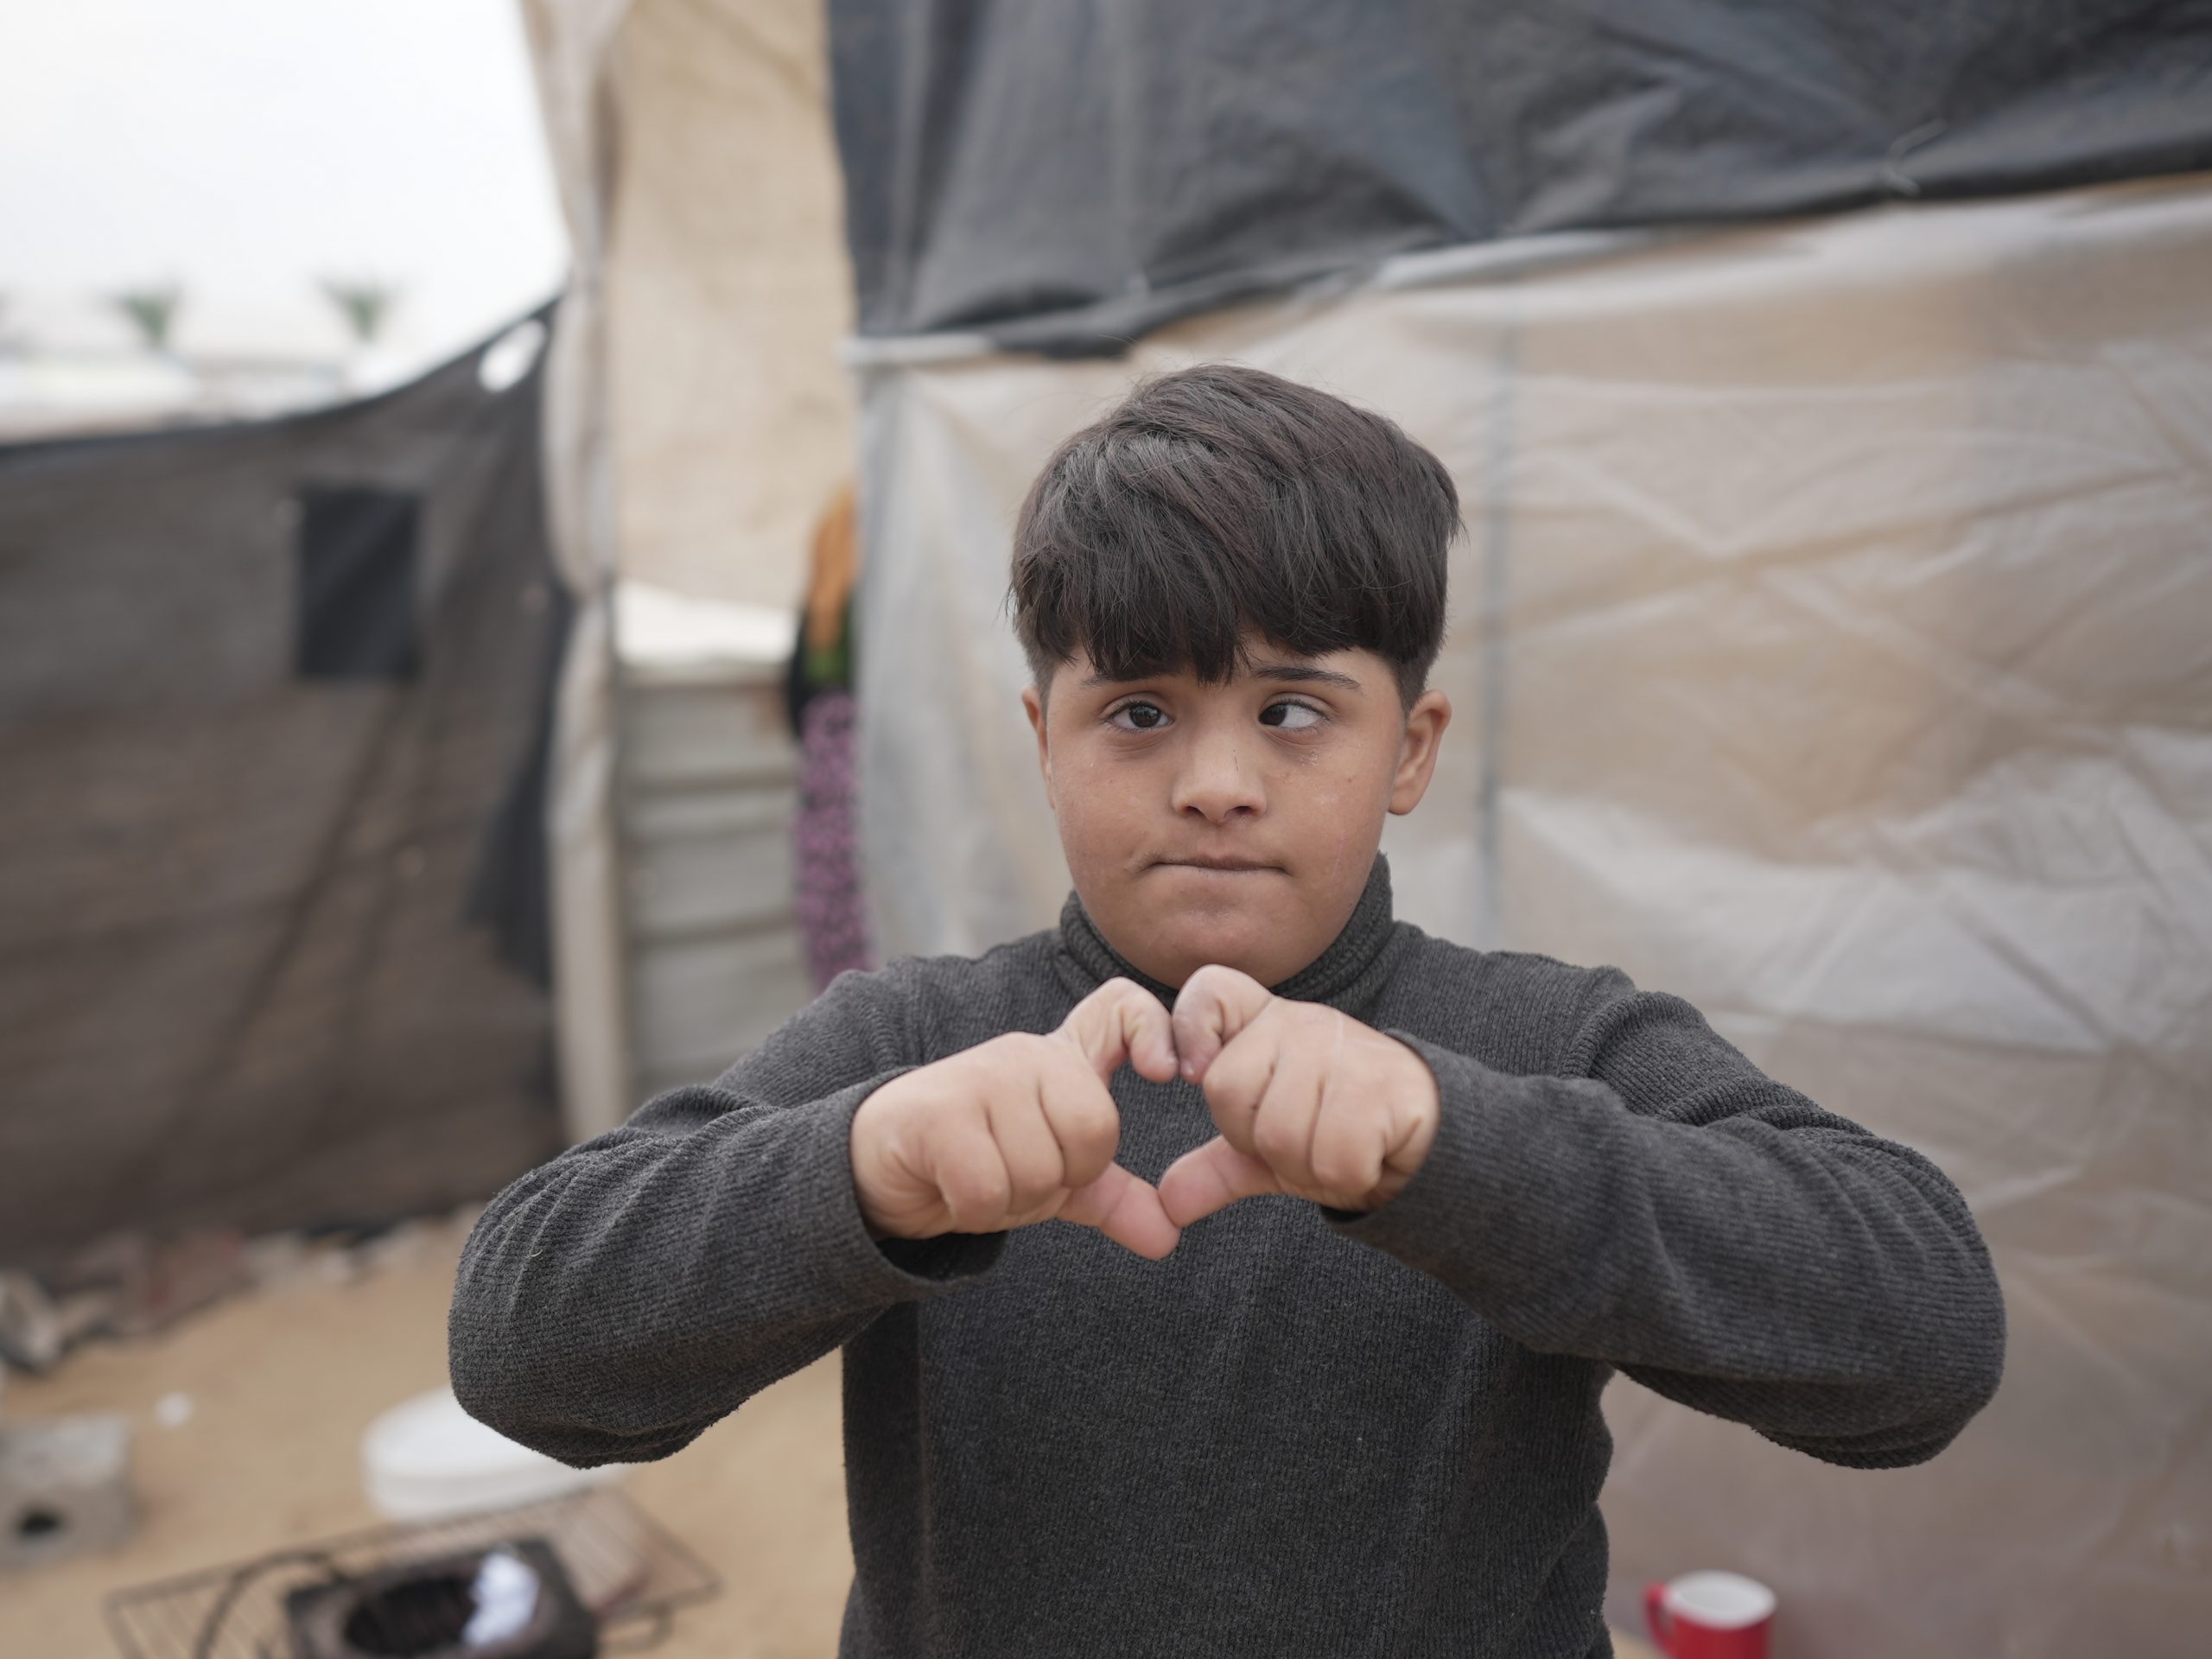 Mutaz's son with Down syndrome makes a love sign while standing in front of his family tent in Al Mawasi.